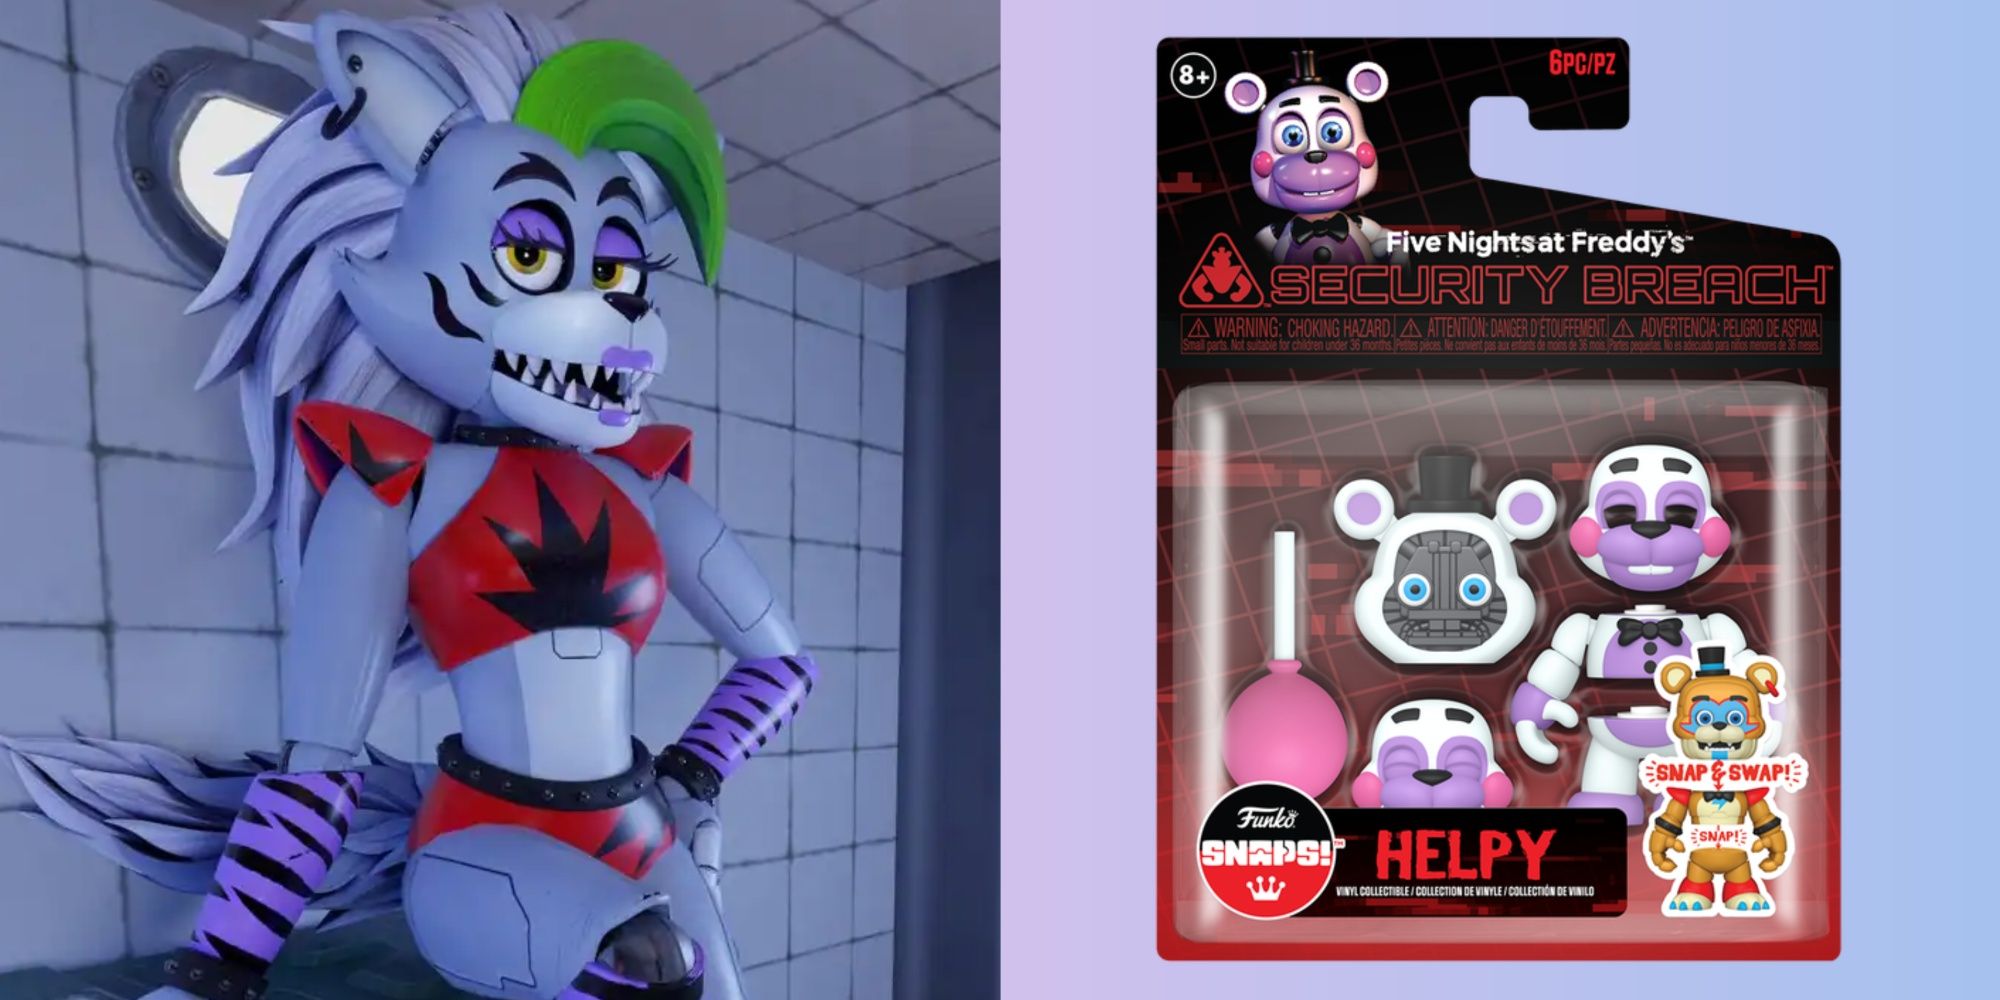 roxanne wolf from five nights at freddy's and the helpy funko snap